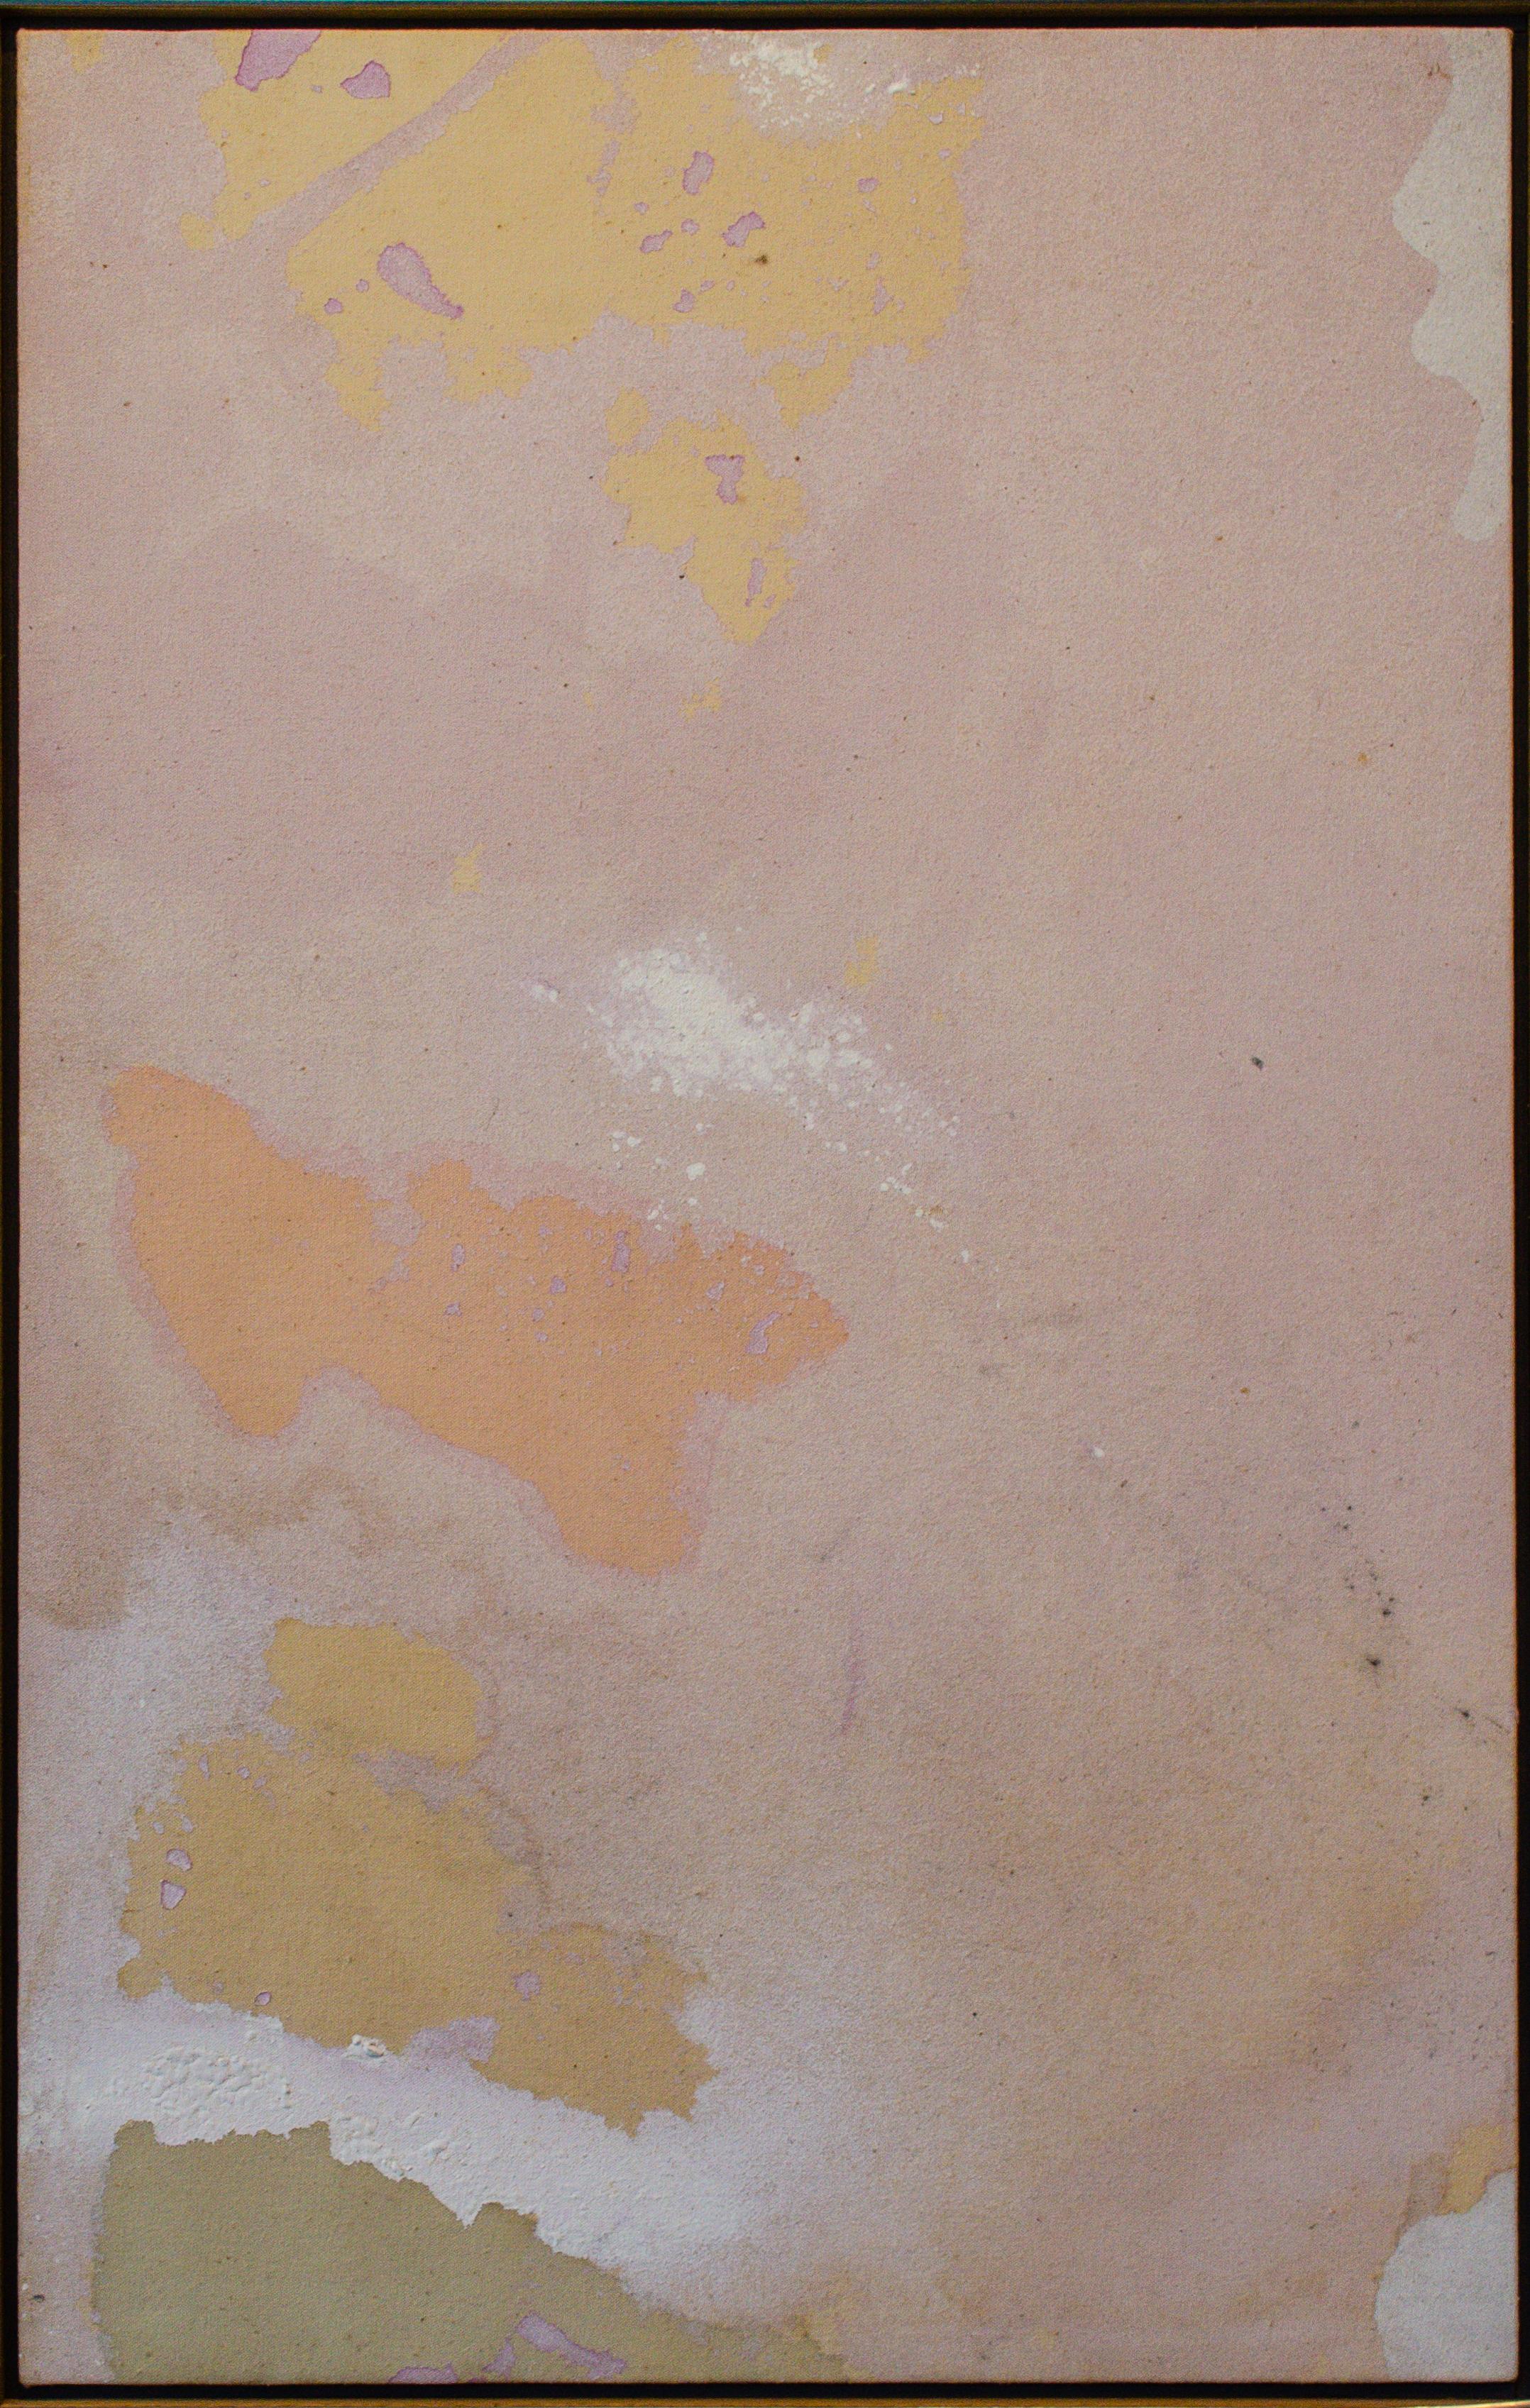 SHERRON FRANCIS (AMERICAN, B. 1940)
Pete's Neck, 1981
Acrylic on canvas
34 1/2 x 22 inches
Signed, titled and dated on the reverse

A reappraisal is long overdue for the second-generation abstract expressionists. Artists such as Helen Frankenthaler,